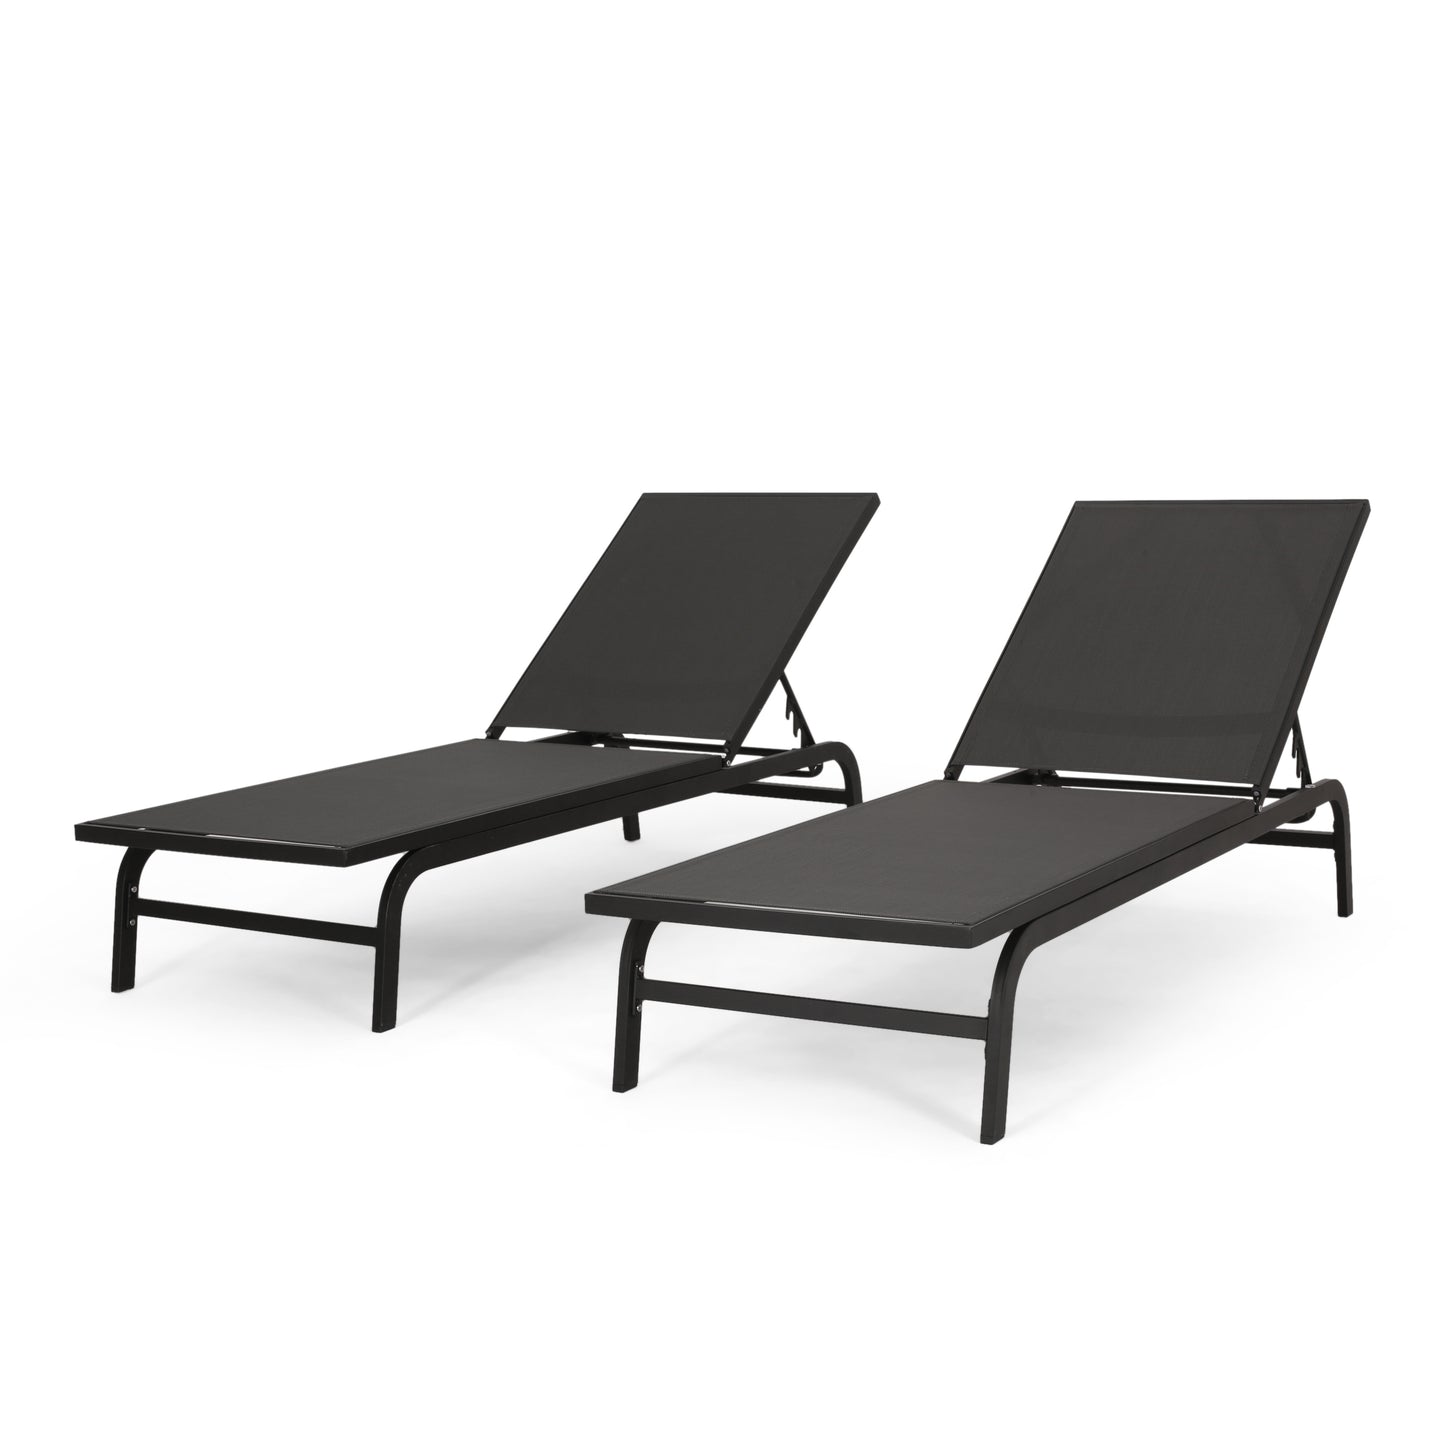 Stekar Outdoor Aluminum and Outdoor Mesh Chaise Lounge, Set of 2